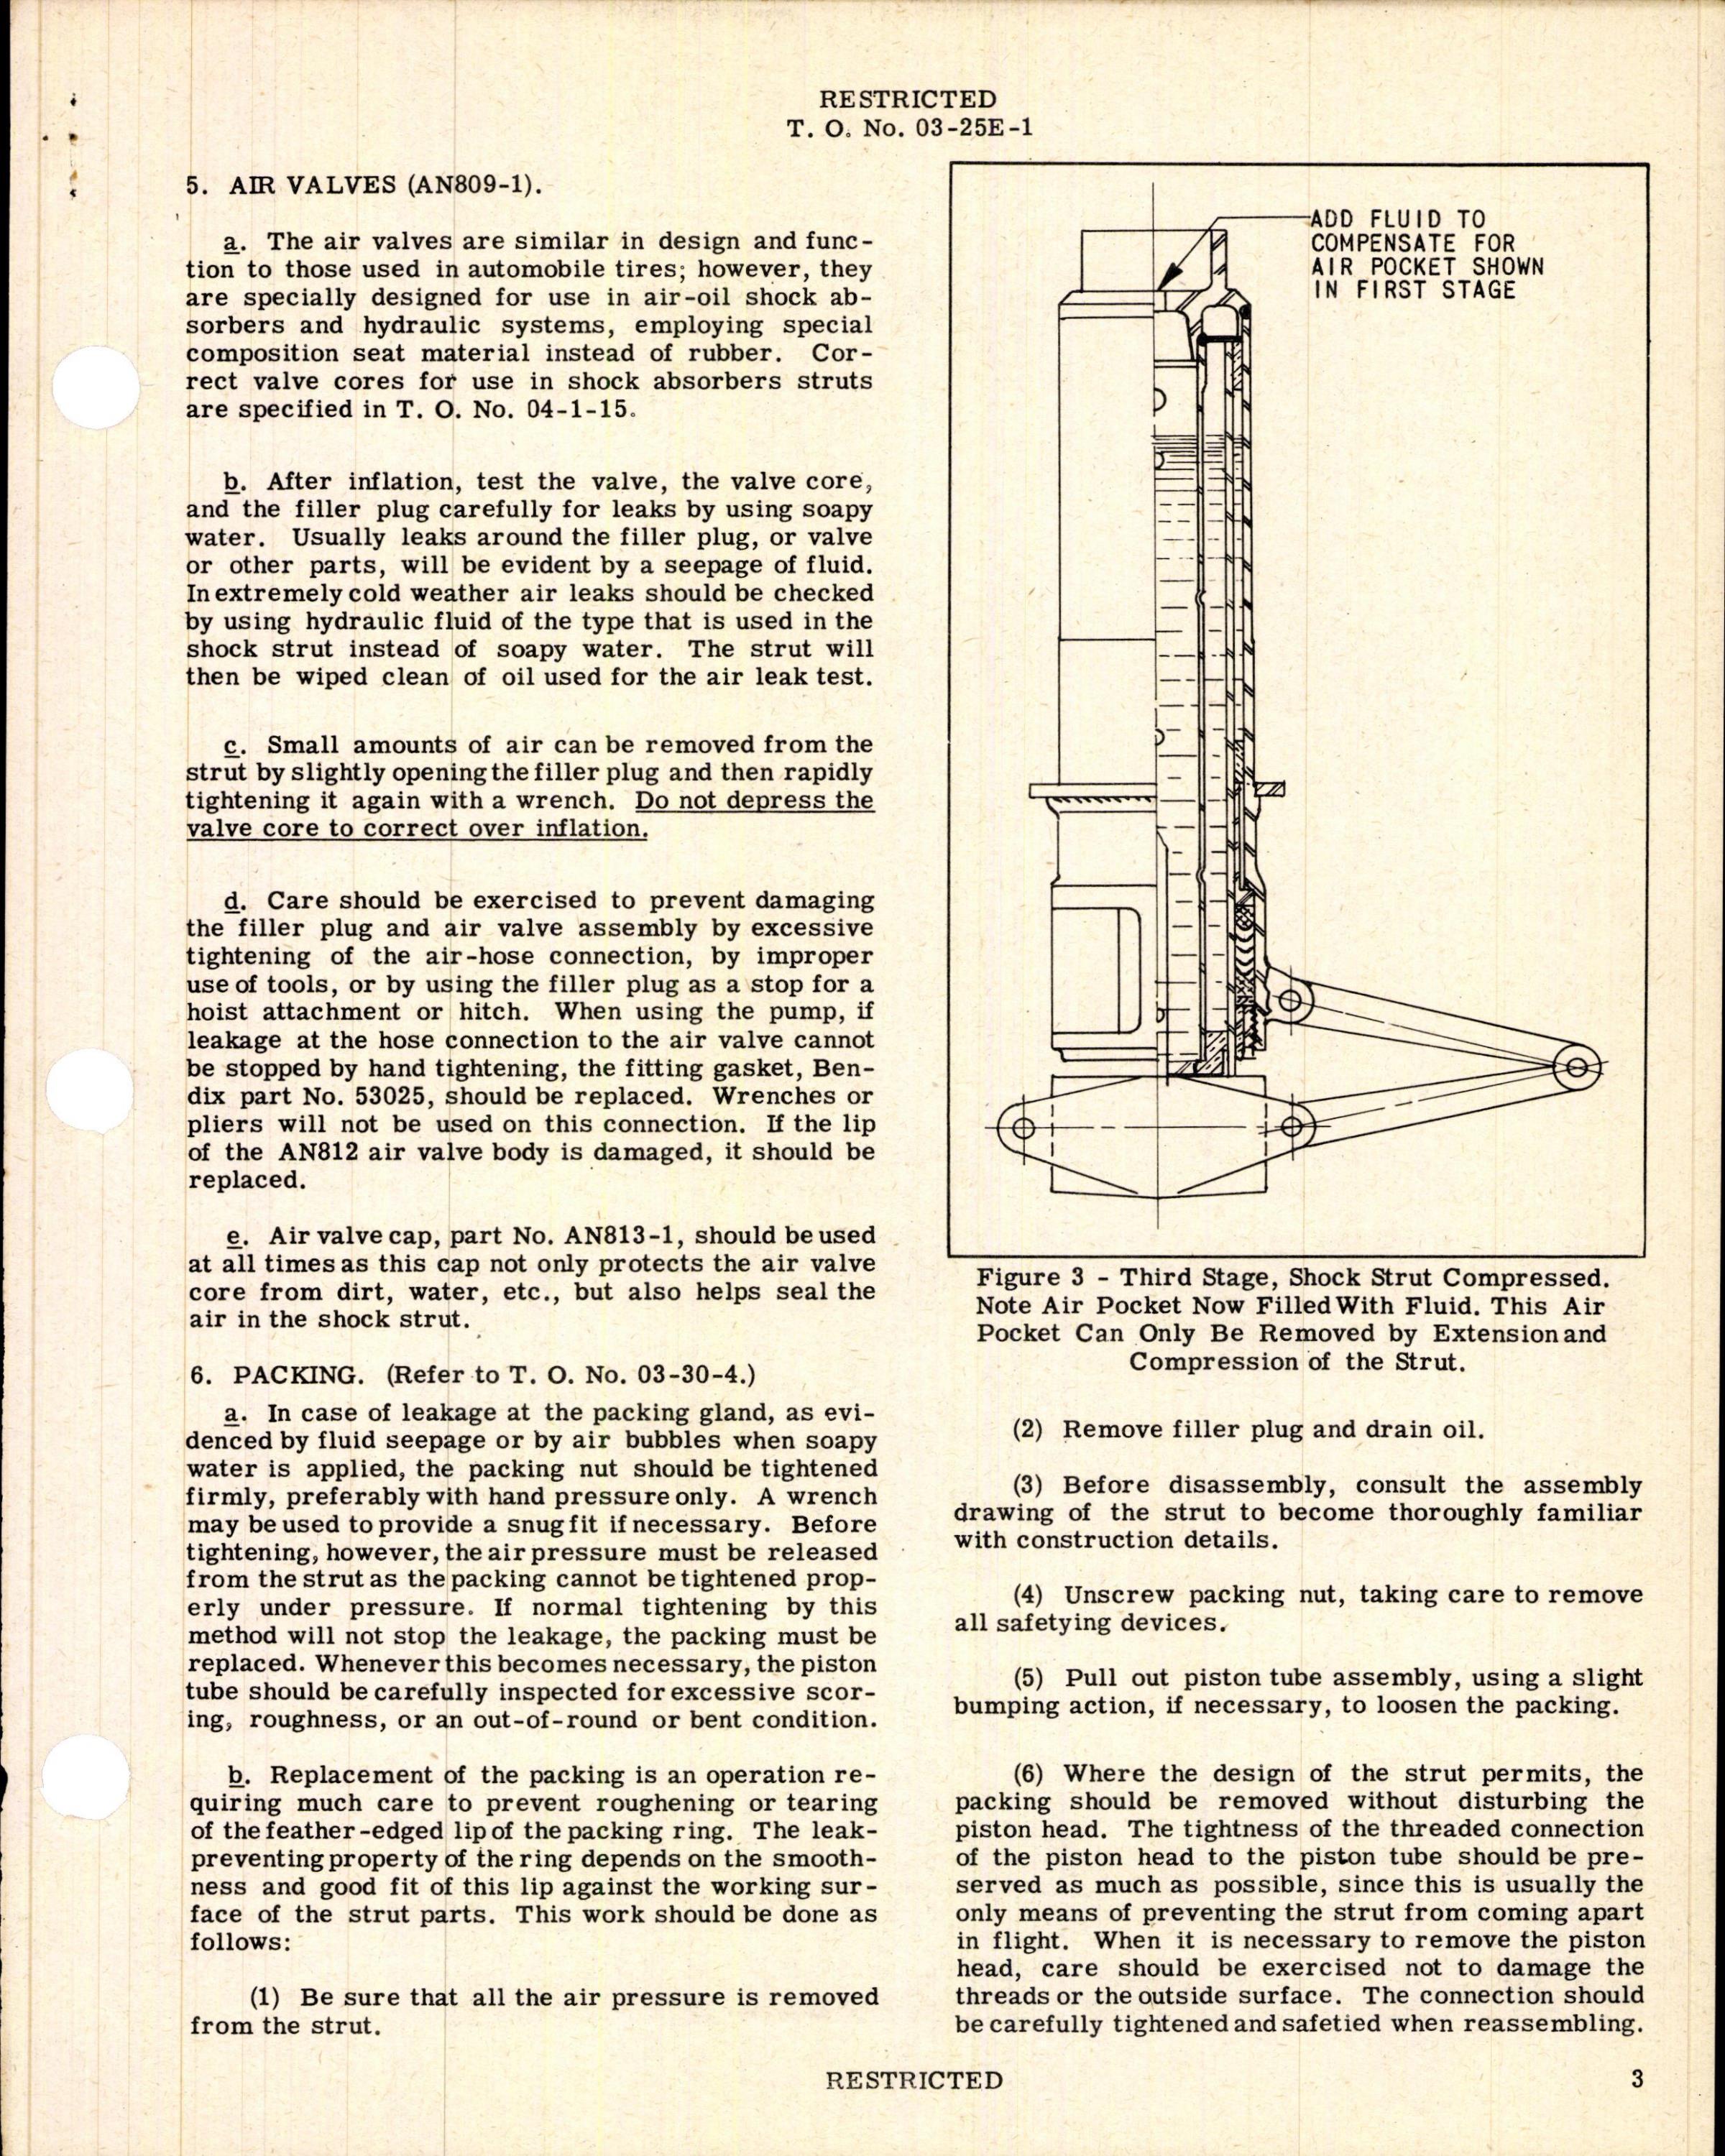 Sample page 3 from AirCorps Library document: Wheels, Brakes and Struts - Air-Oil Shock Absorber Struts